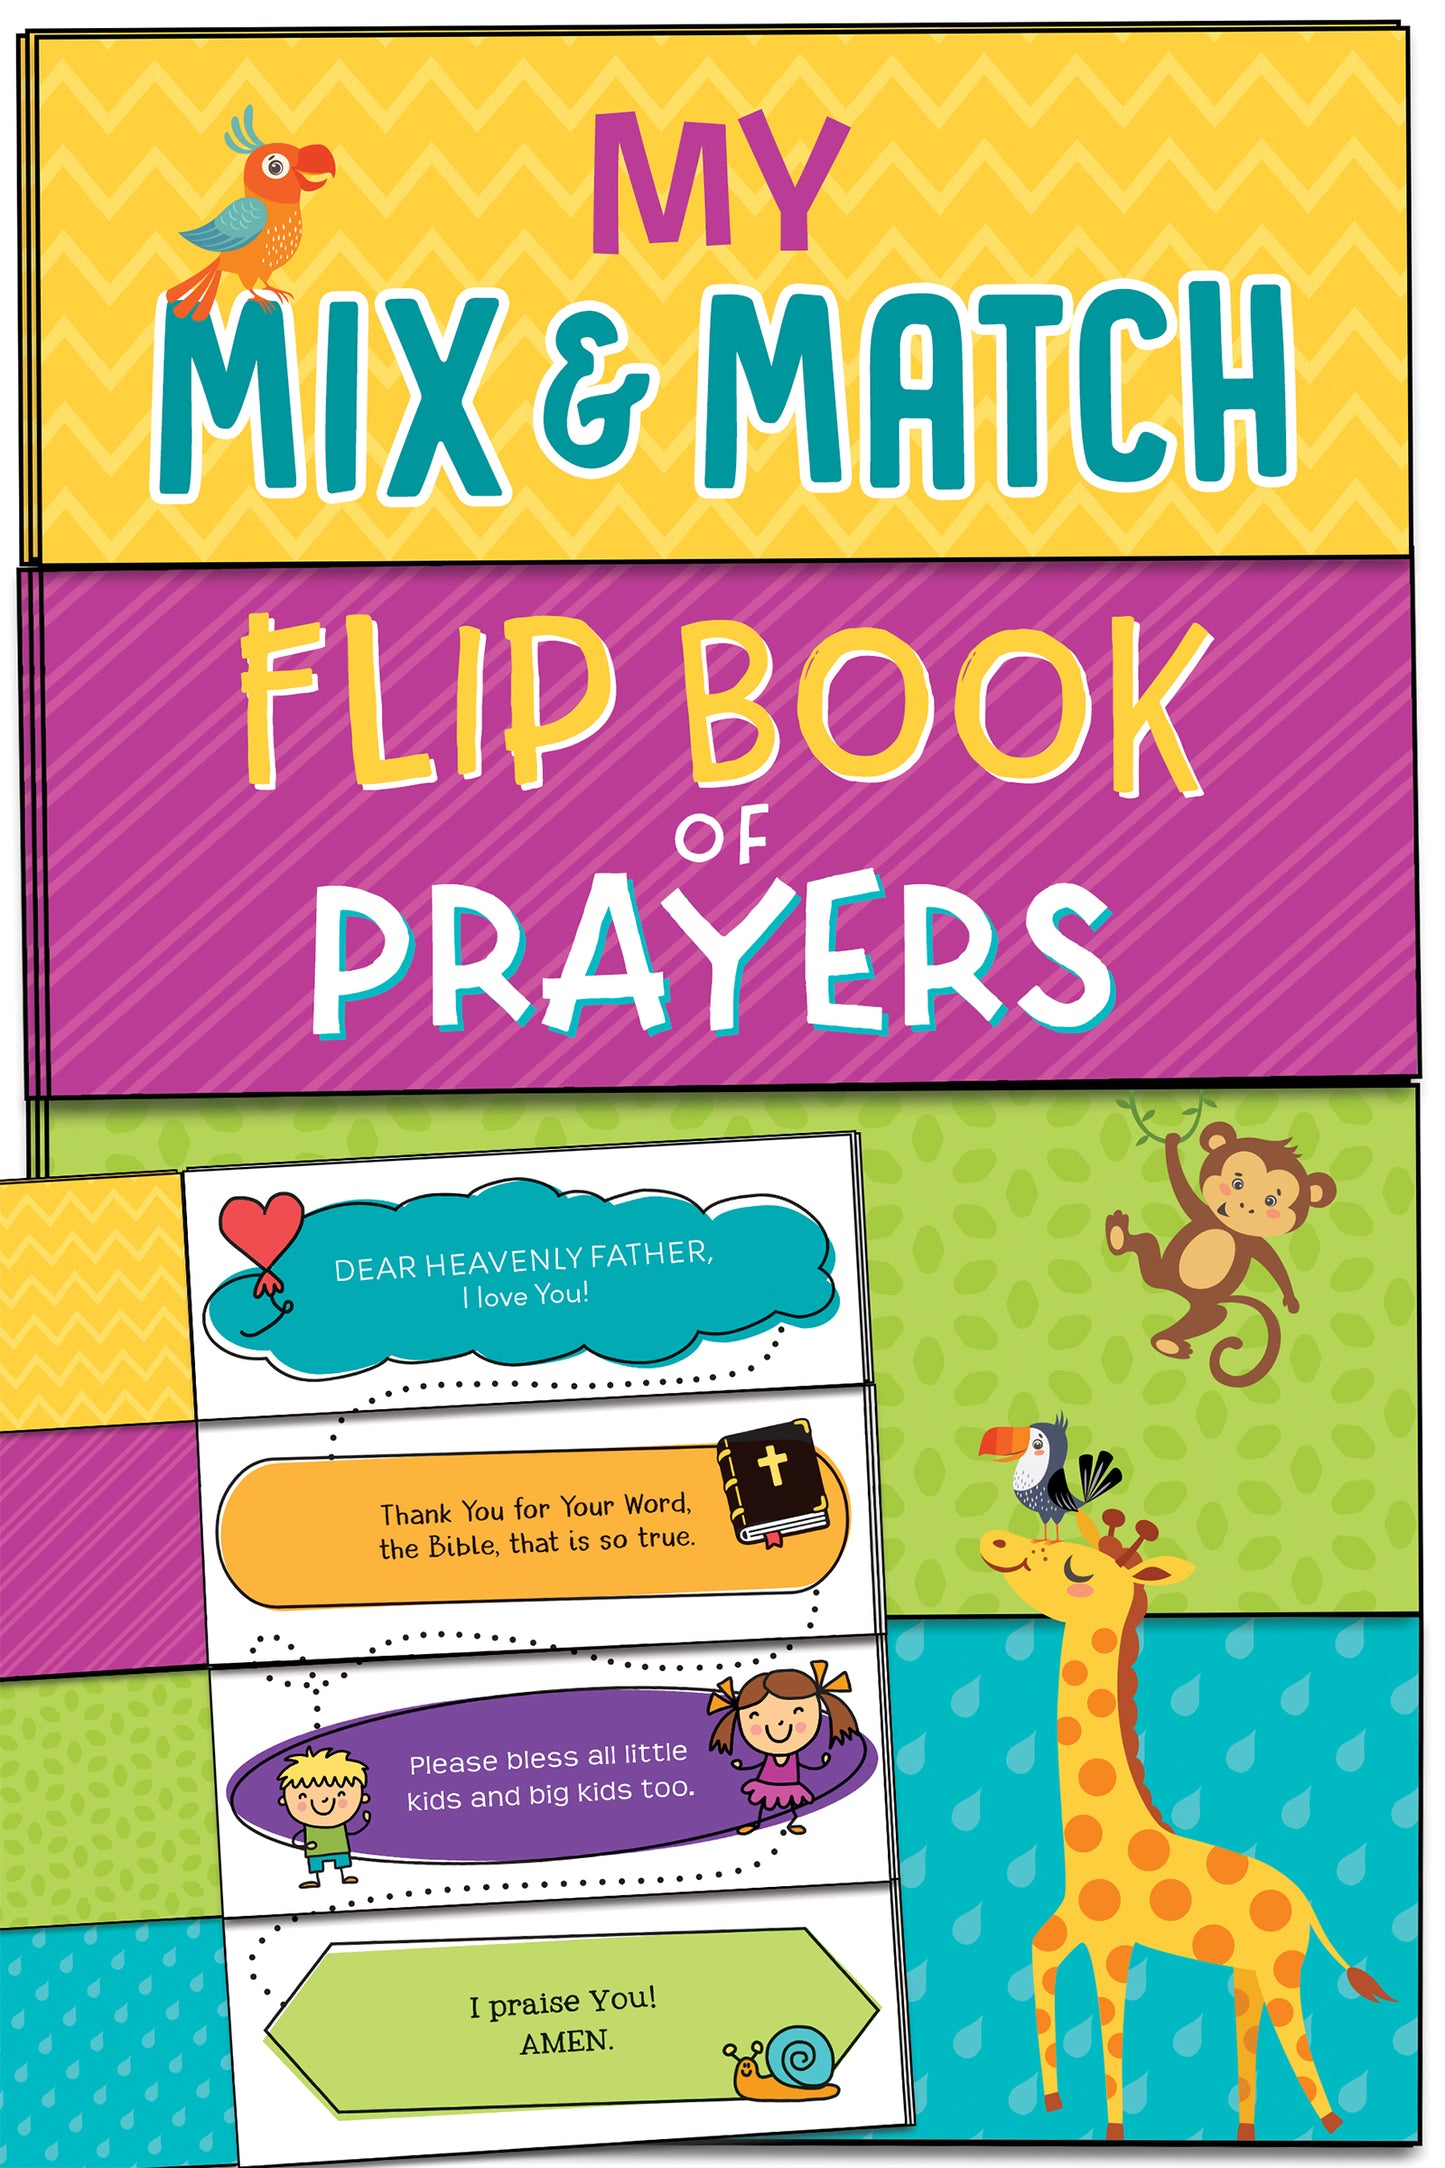 My Mix and Match Flip Book of Prayers - The Christian Gift Company